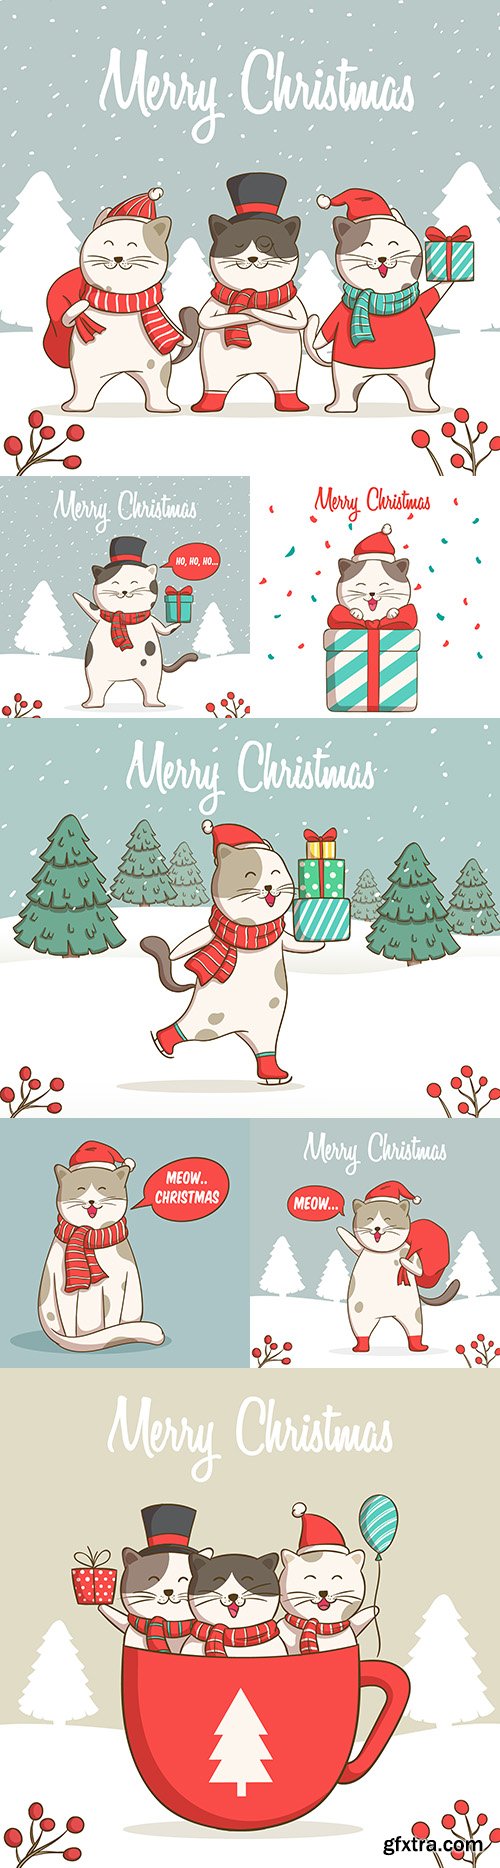 Fun Christmas illustrations of cute cats hand drawing